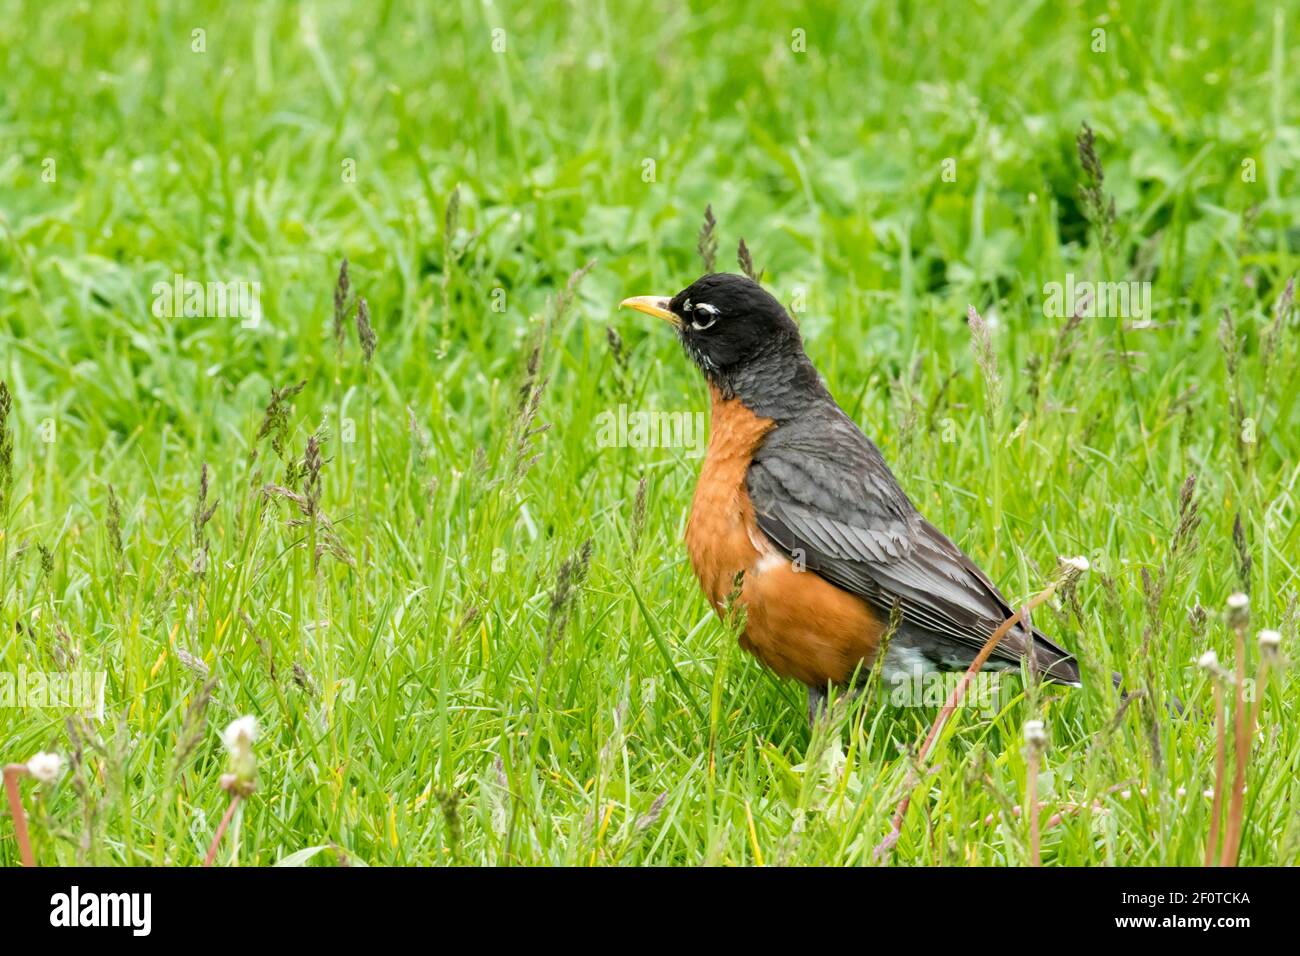 American robin, migratory thrushes (Turdus migratorius), songbirds, animals, birds, American robin, Forillon national park, Quebec, Canada Stock Photo